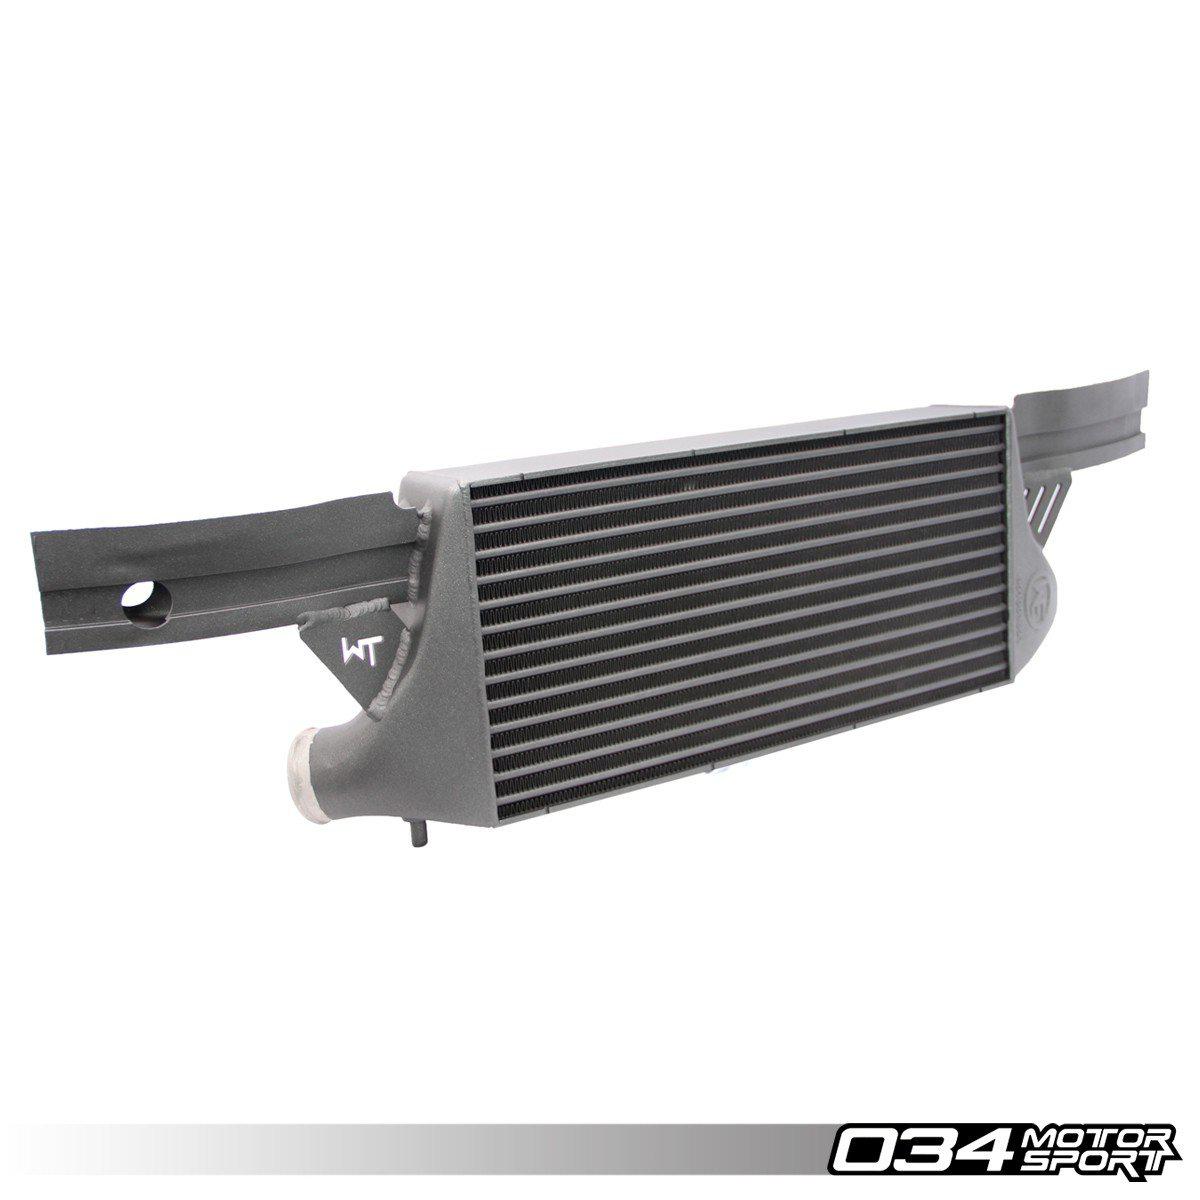 Wagner Tuning Evo 2 Competition Intercooler, 8p Audi RS3 2.5 TFSI-A Little Tuning Co